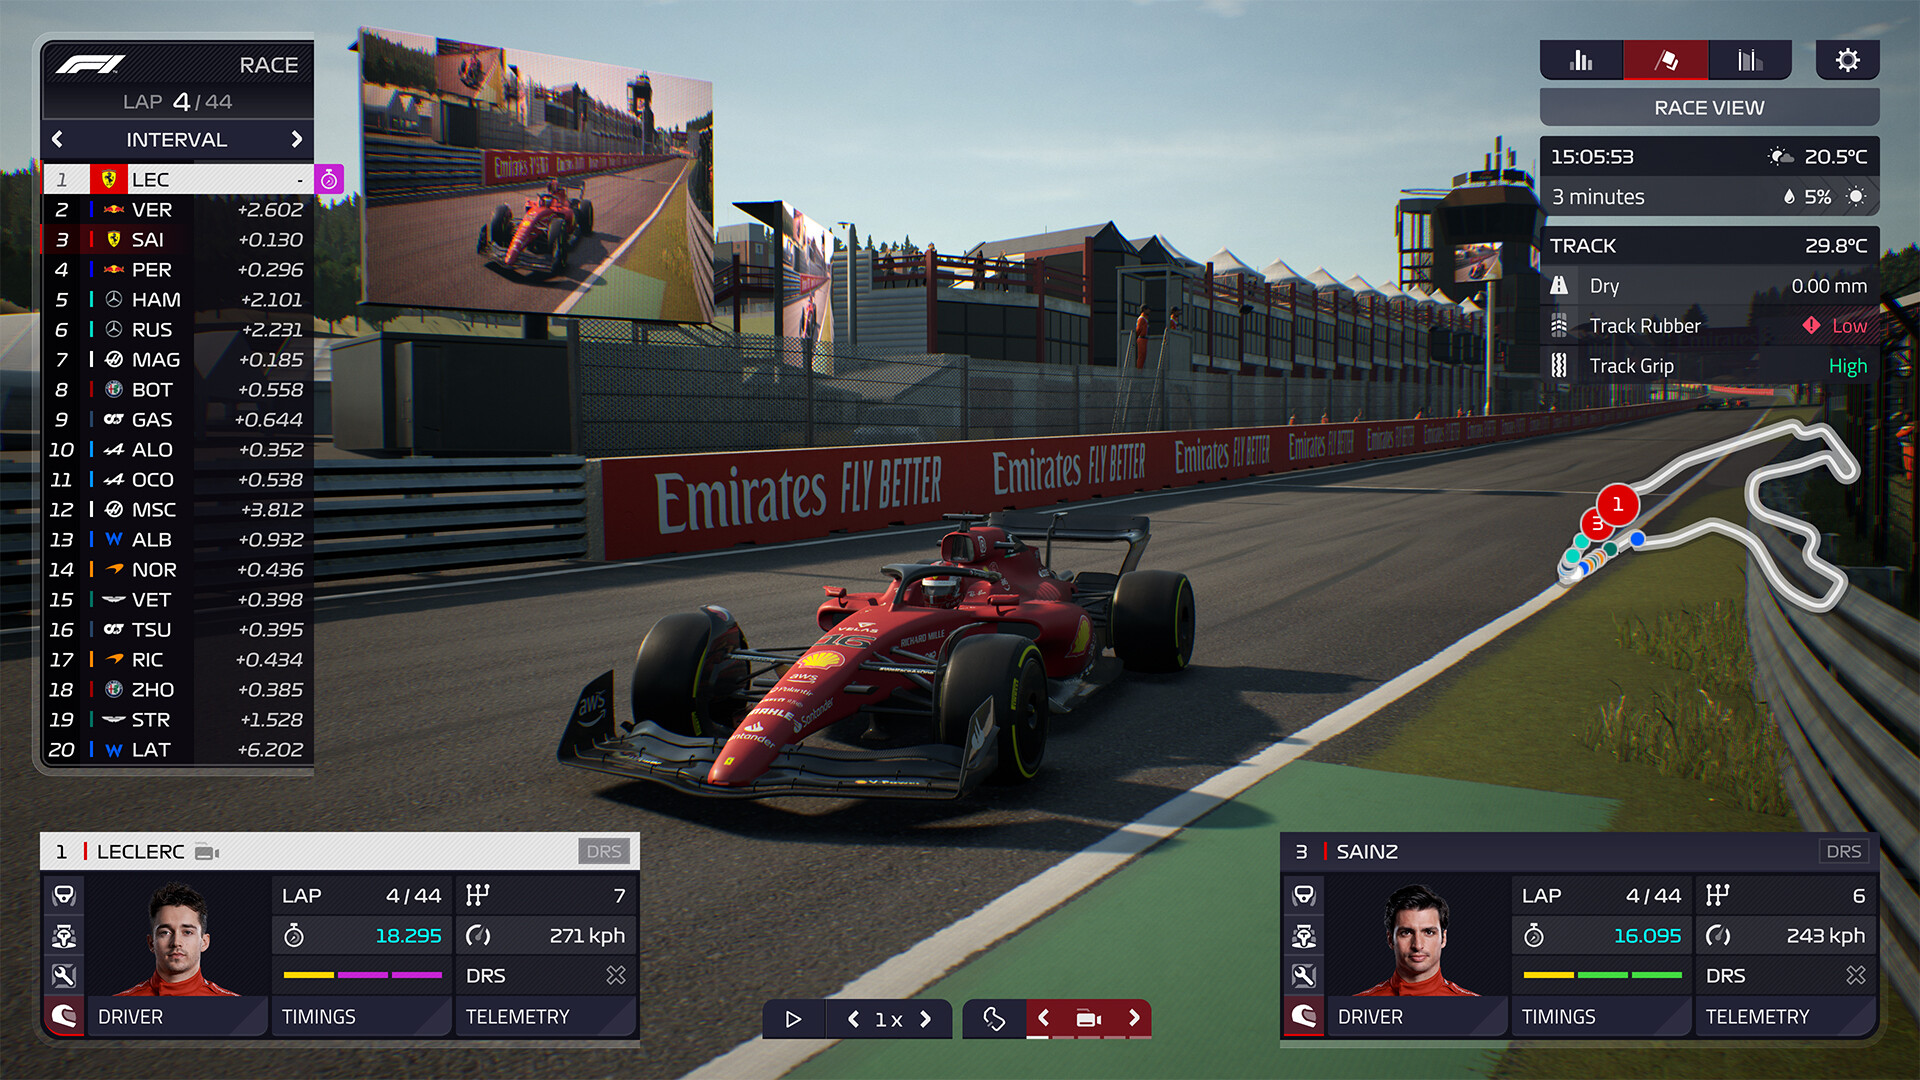 f1 manager 22 online